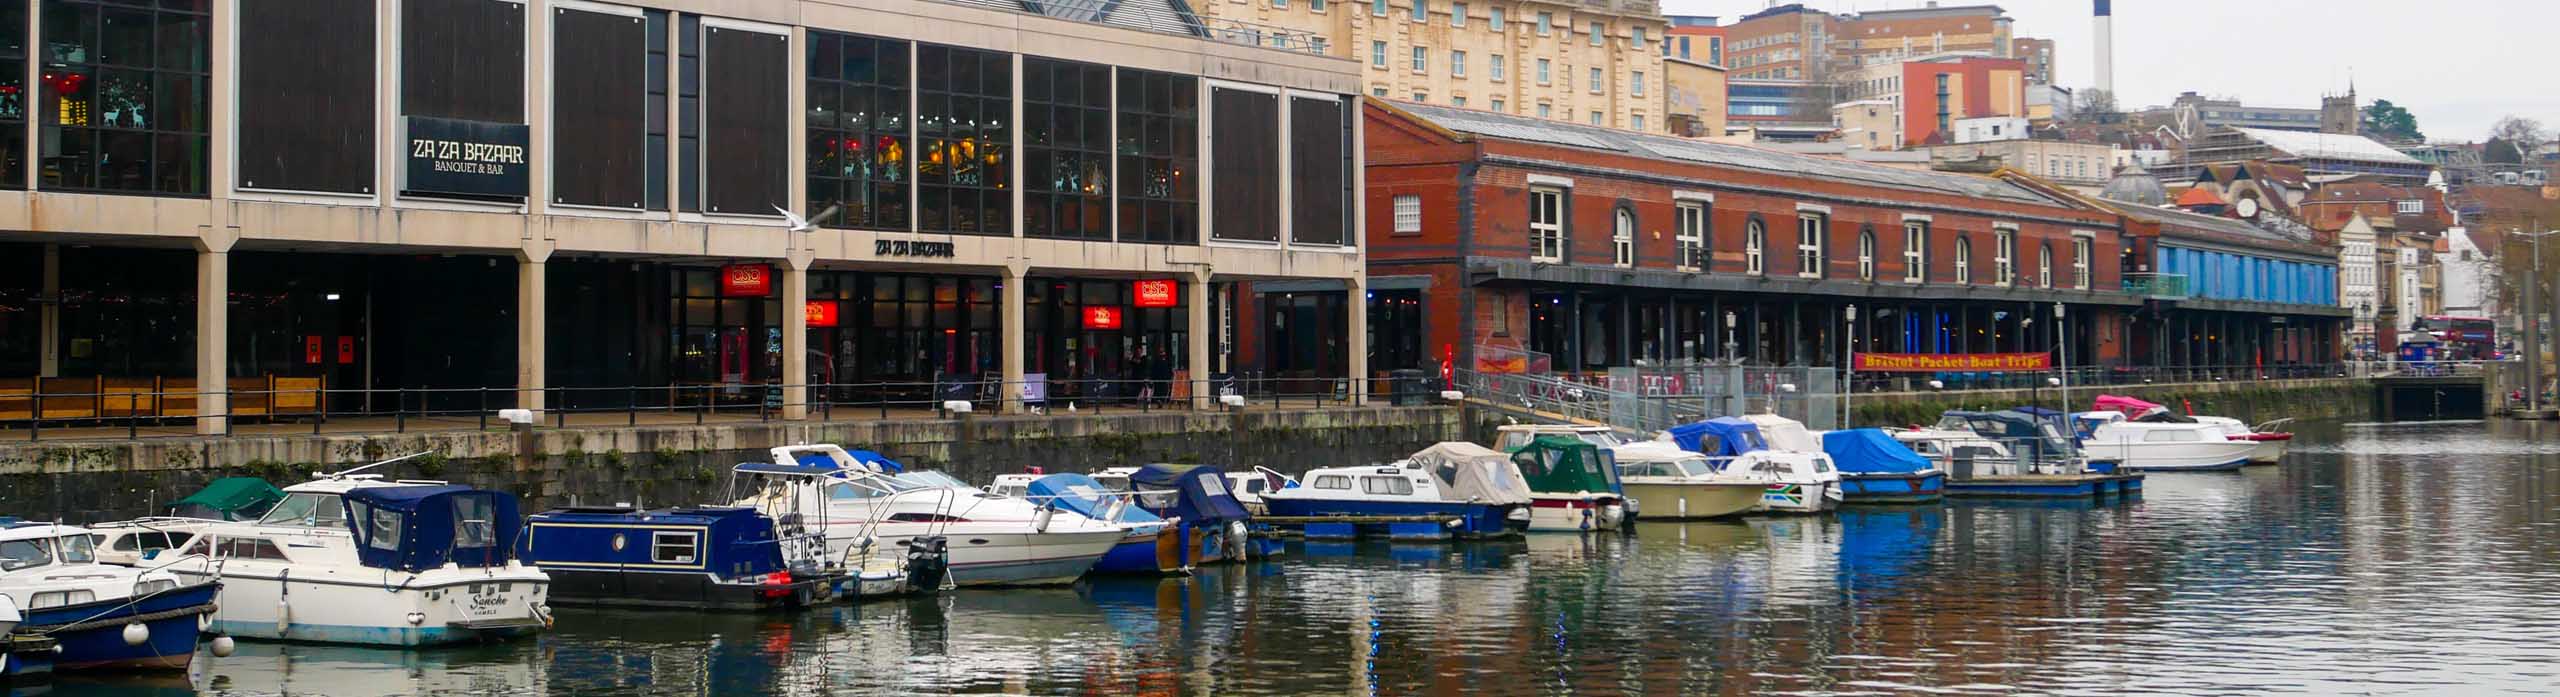 things-to-do-this-winter-in-bristol